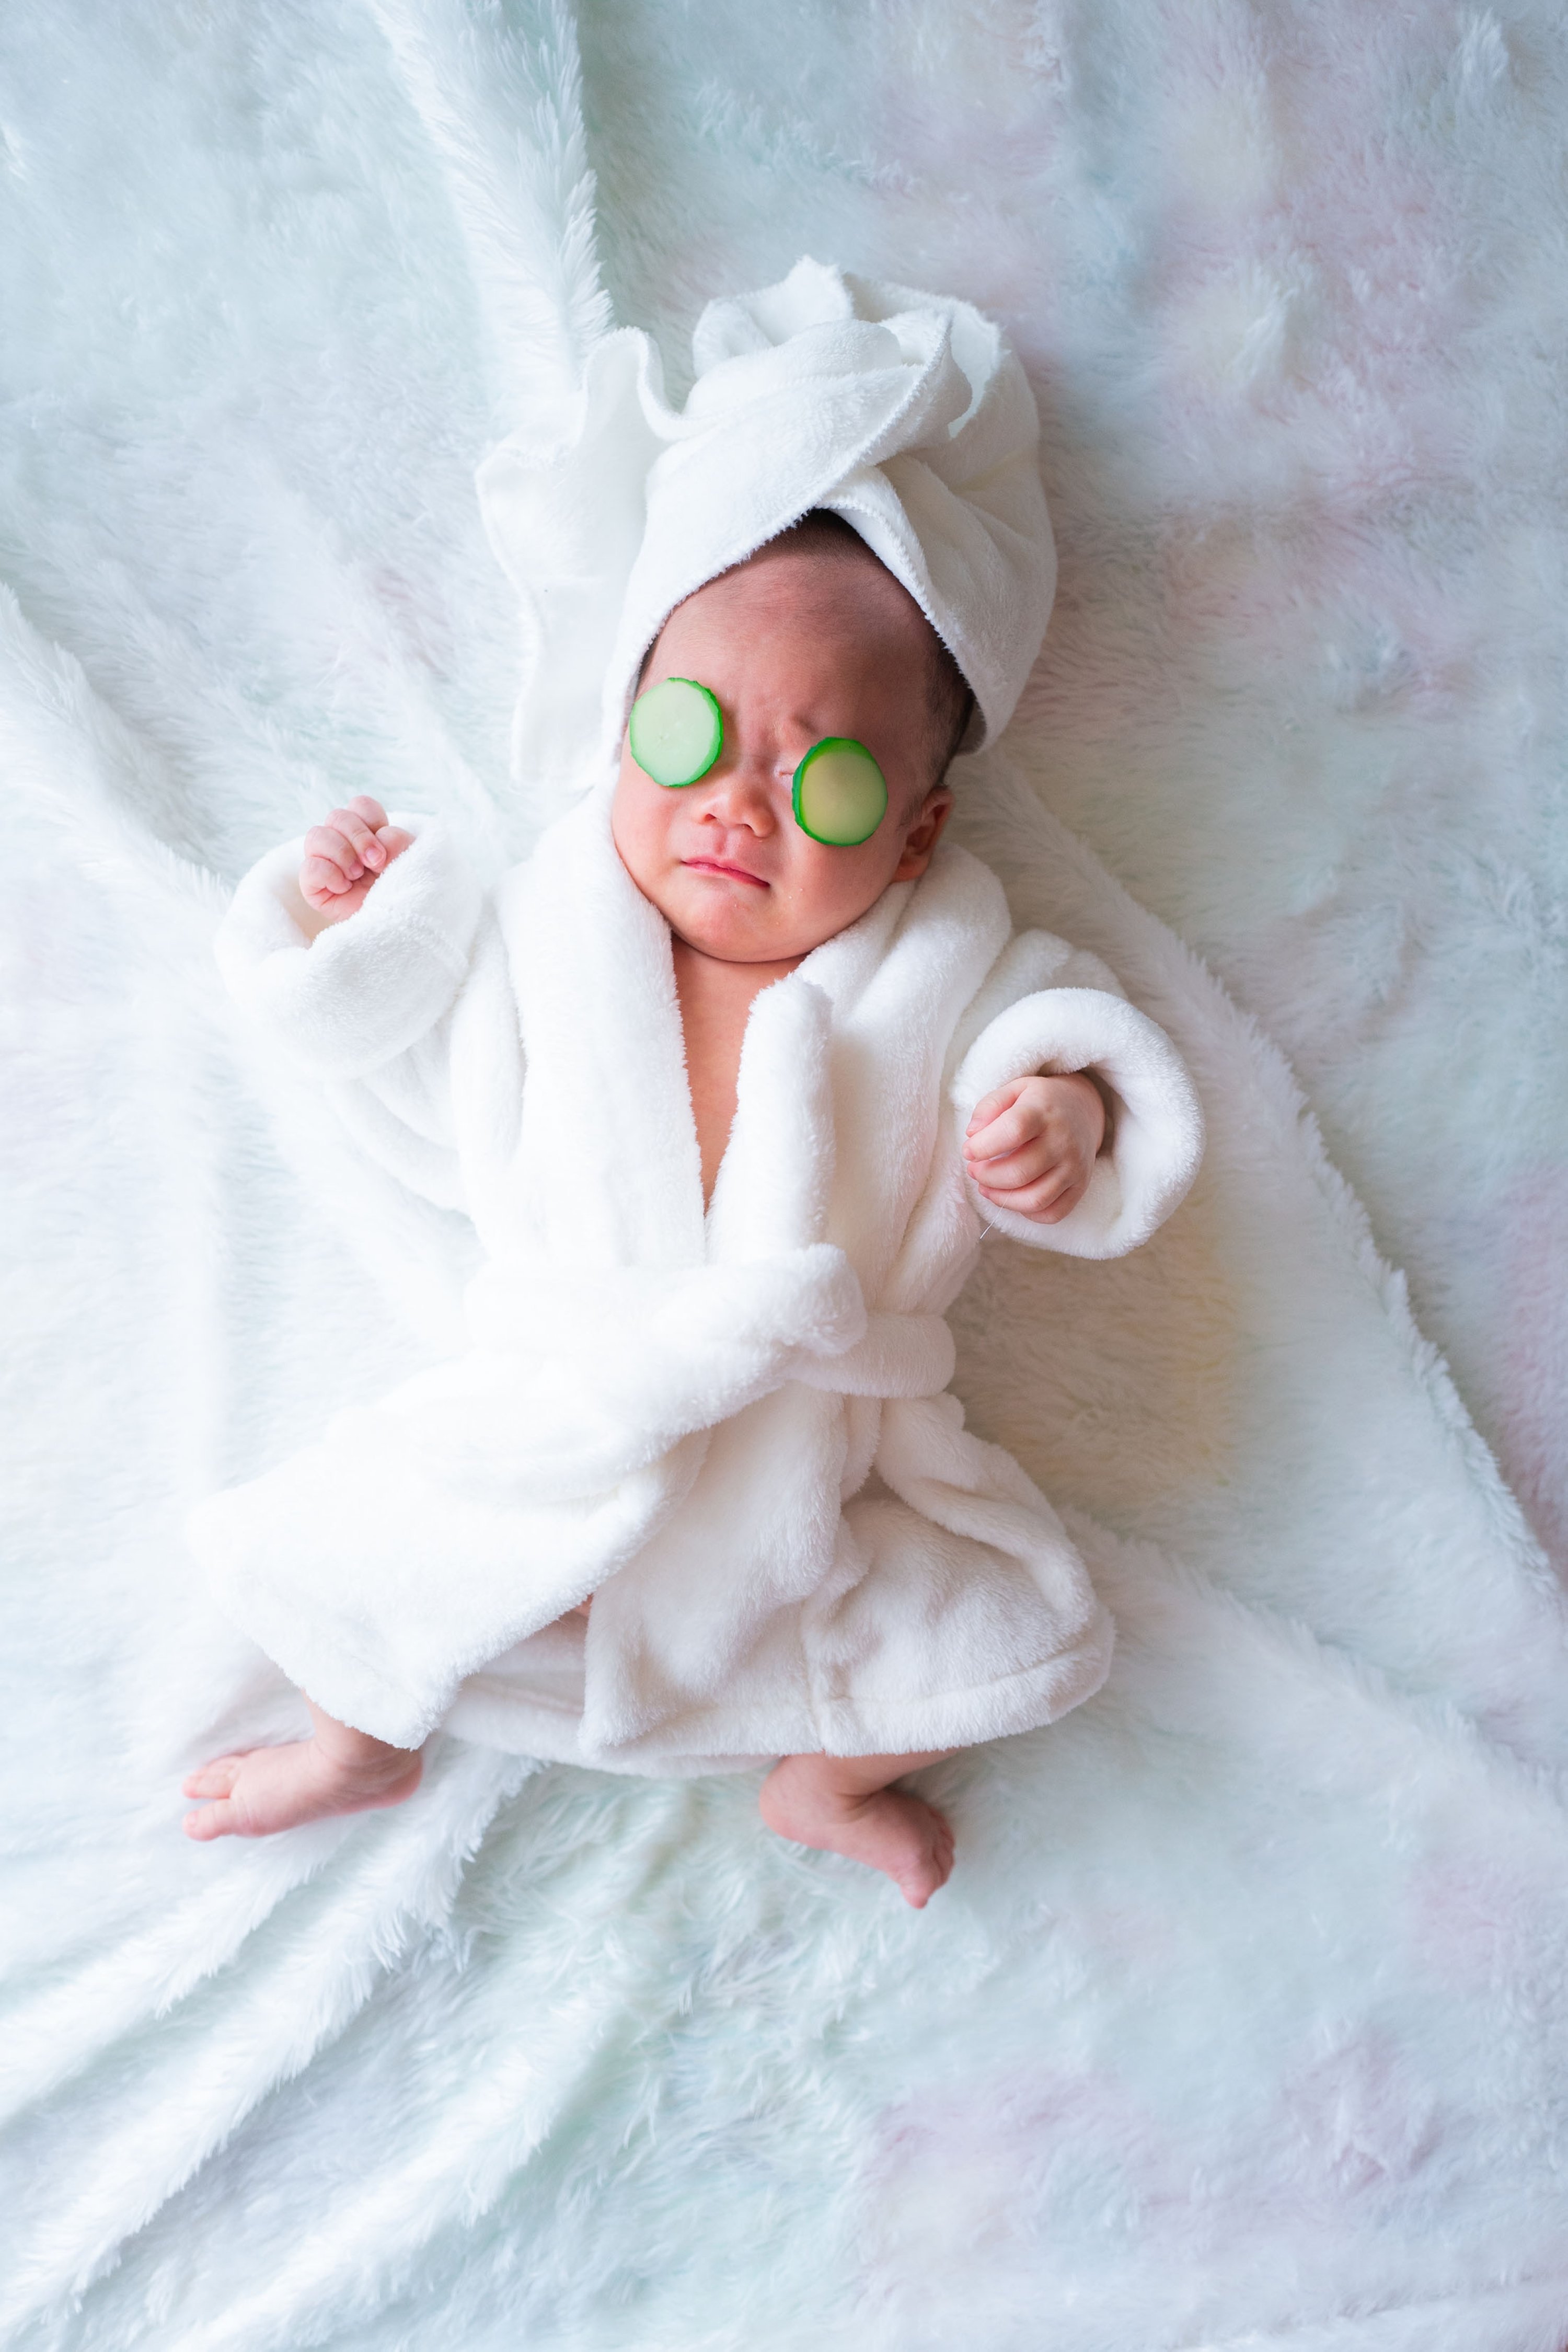 Even babies need some skin care. (Shutterstock Photo)